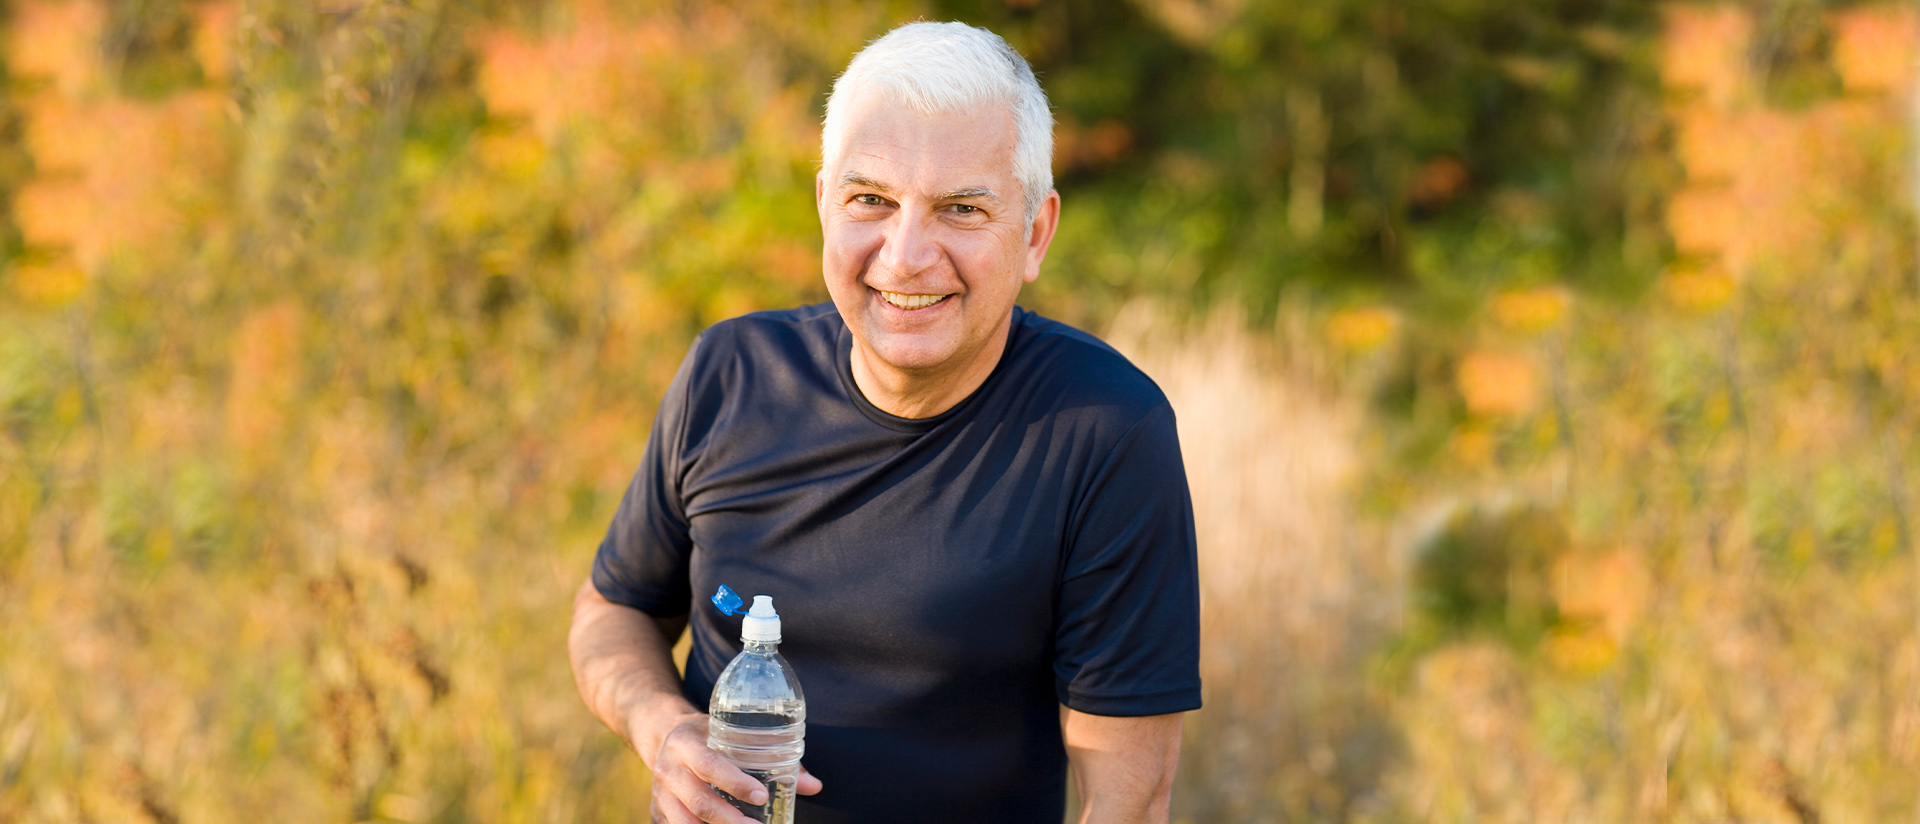 man outside with water bottle